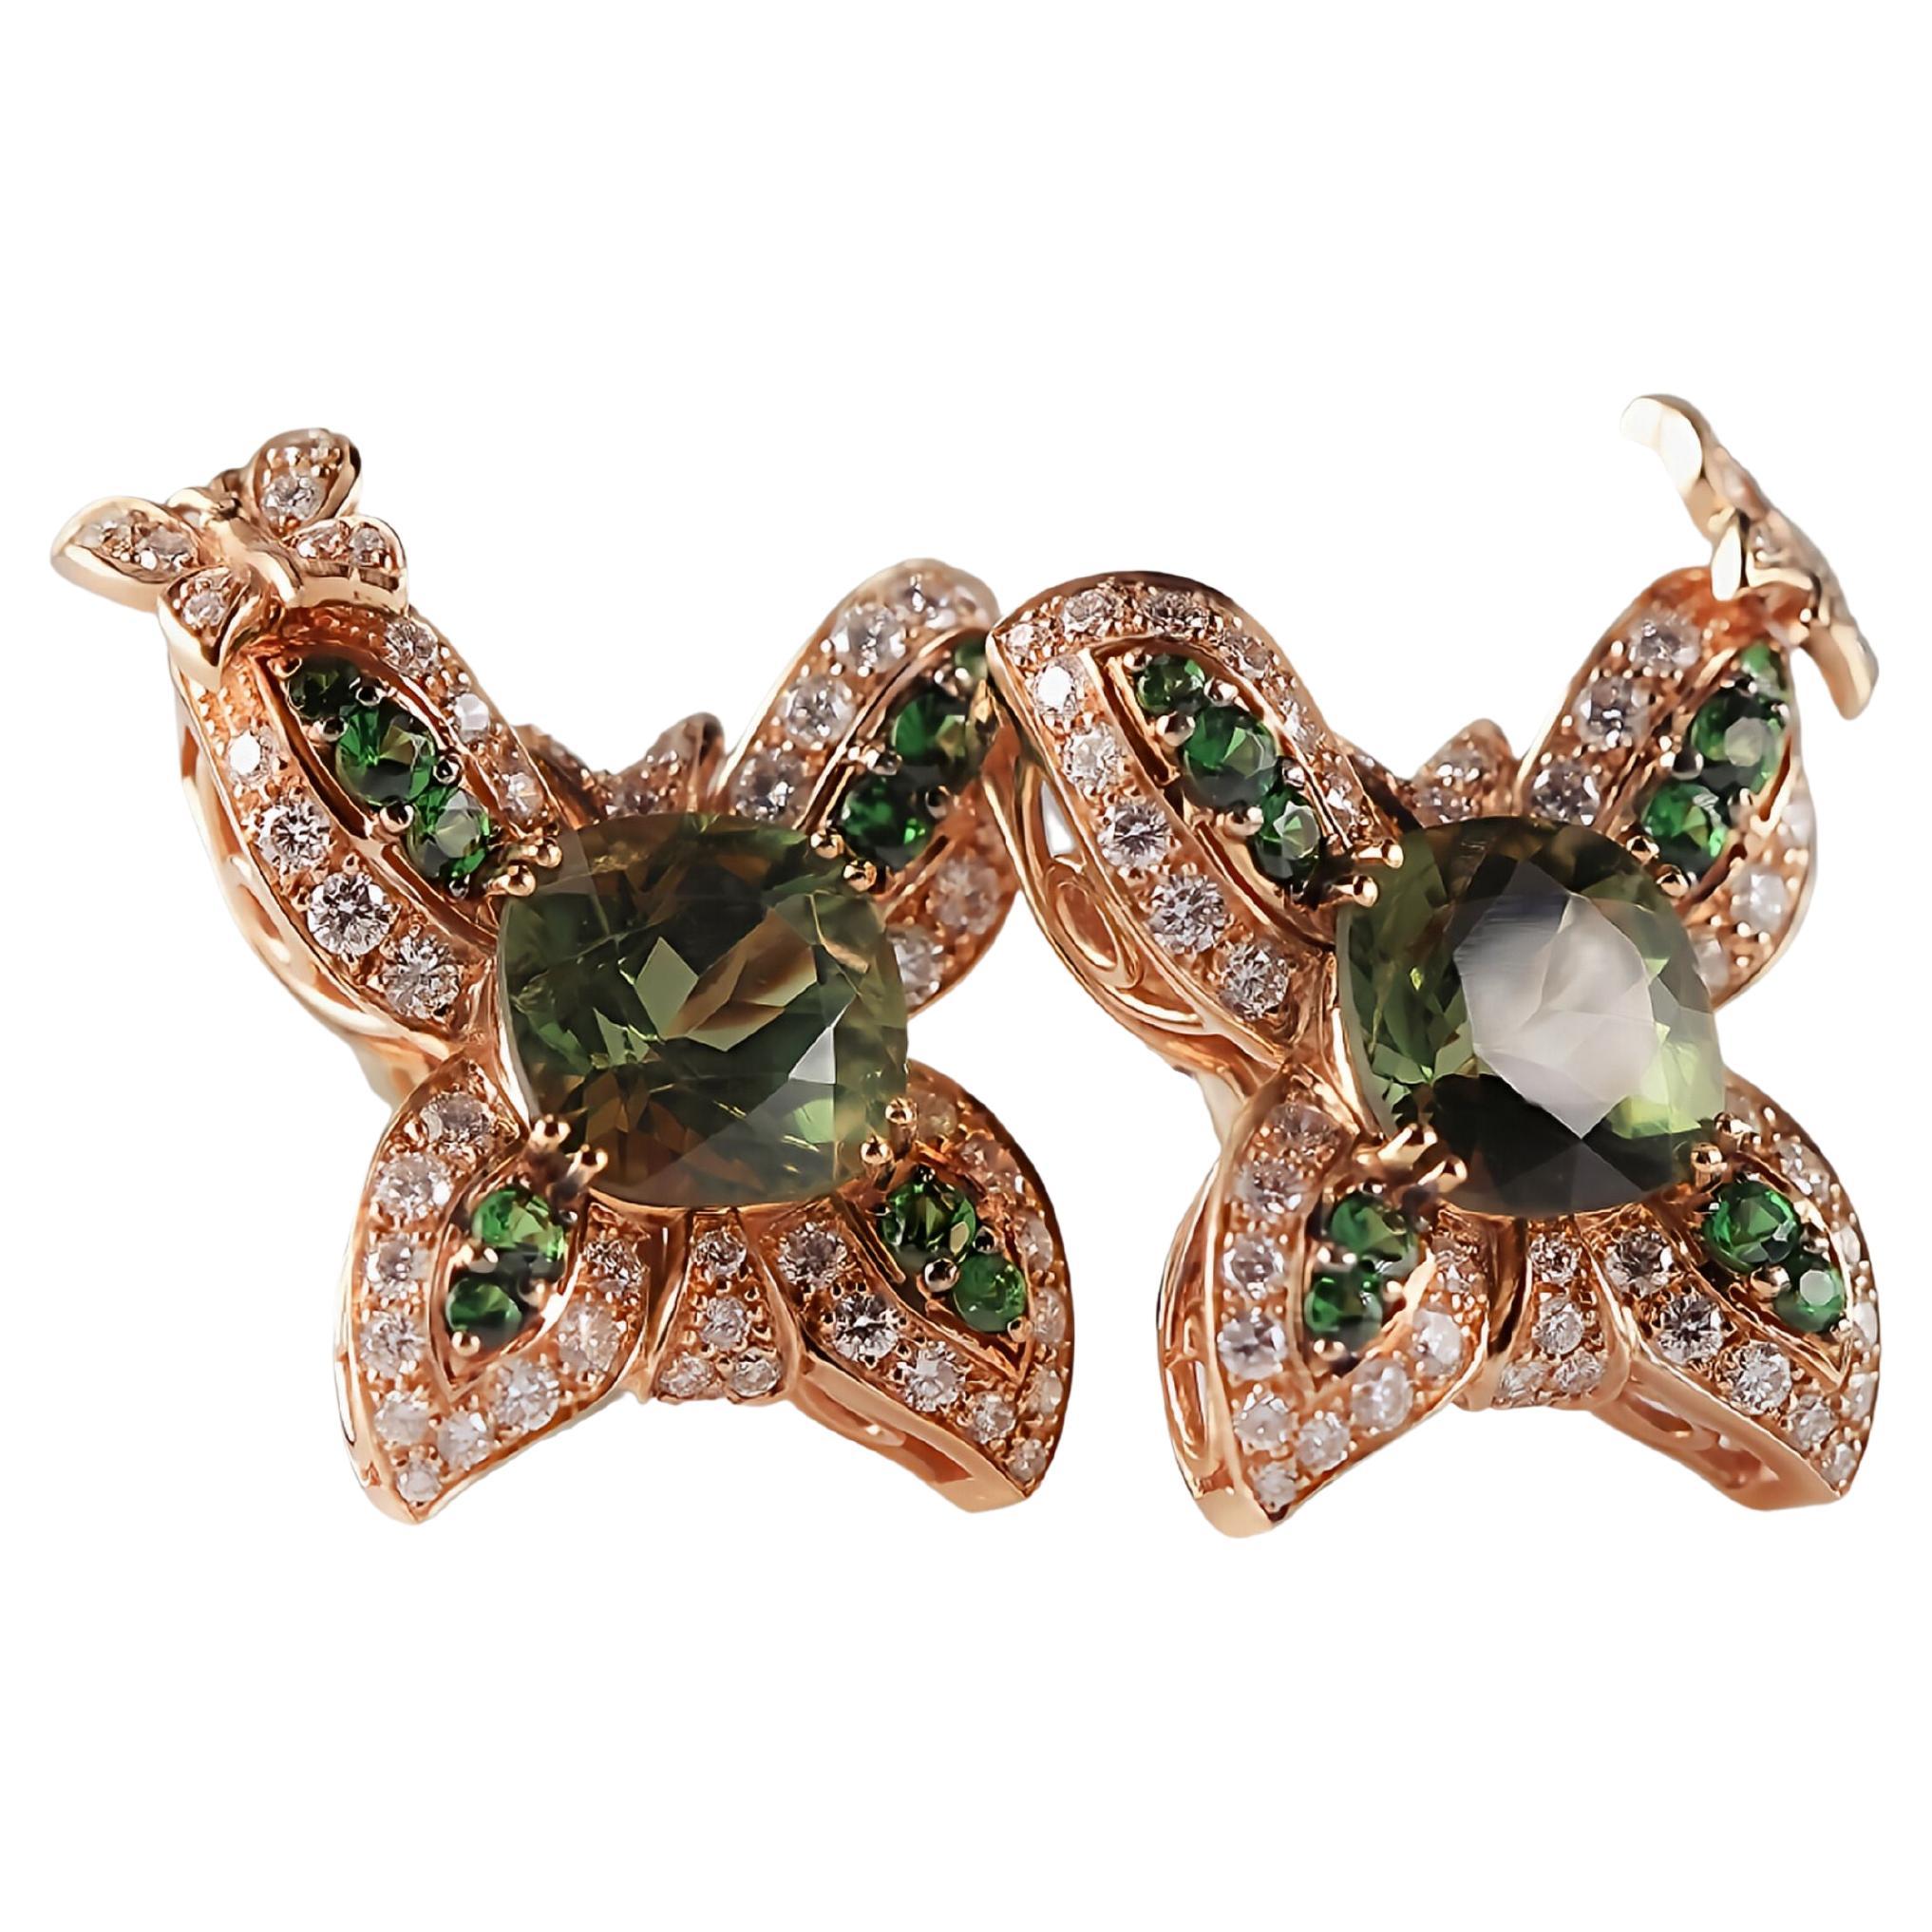 Sweet 18kt Rose Gold Earrings with Green Tourmalines, Diamonds, and Tsavorites